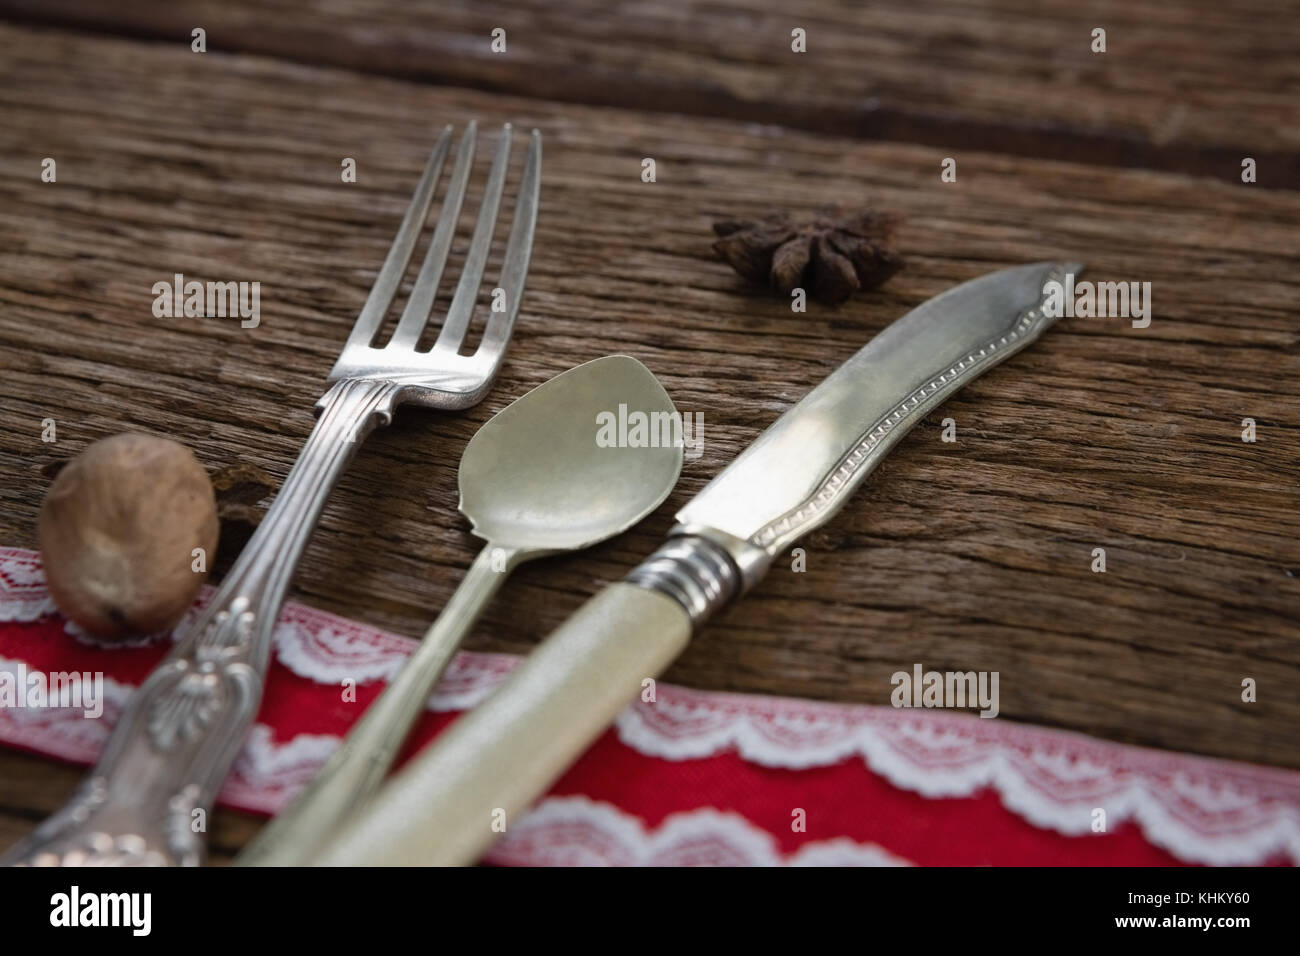 Cutlery with star anise and nutmeg on wooden table Stock Photo